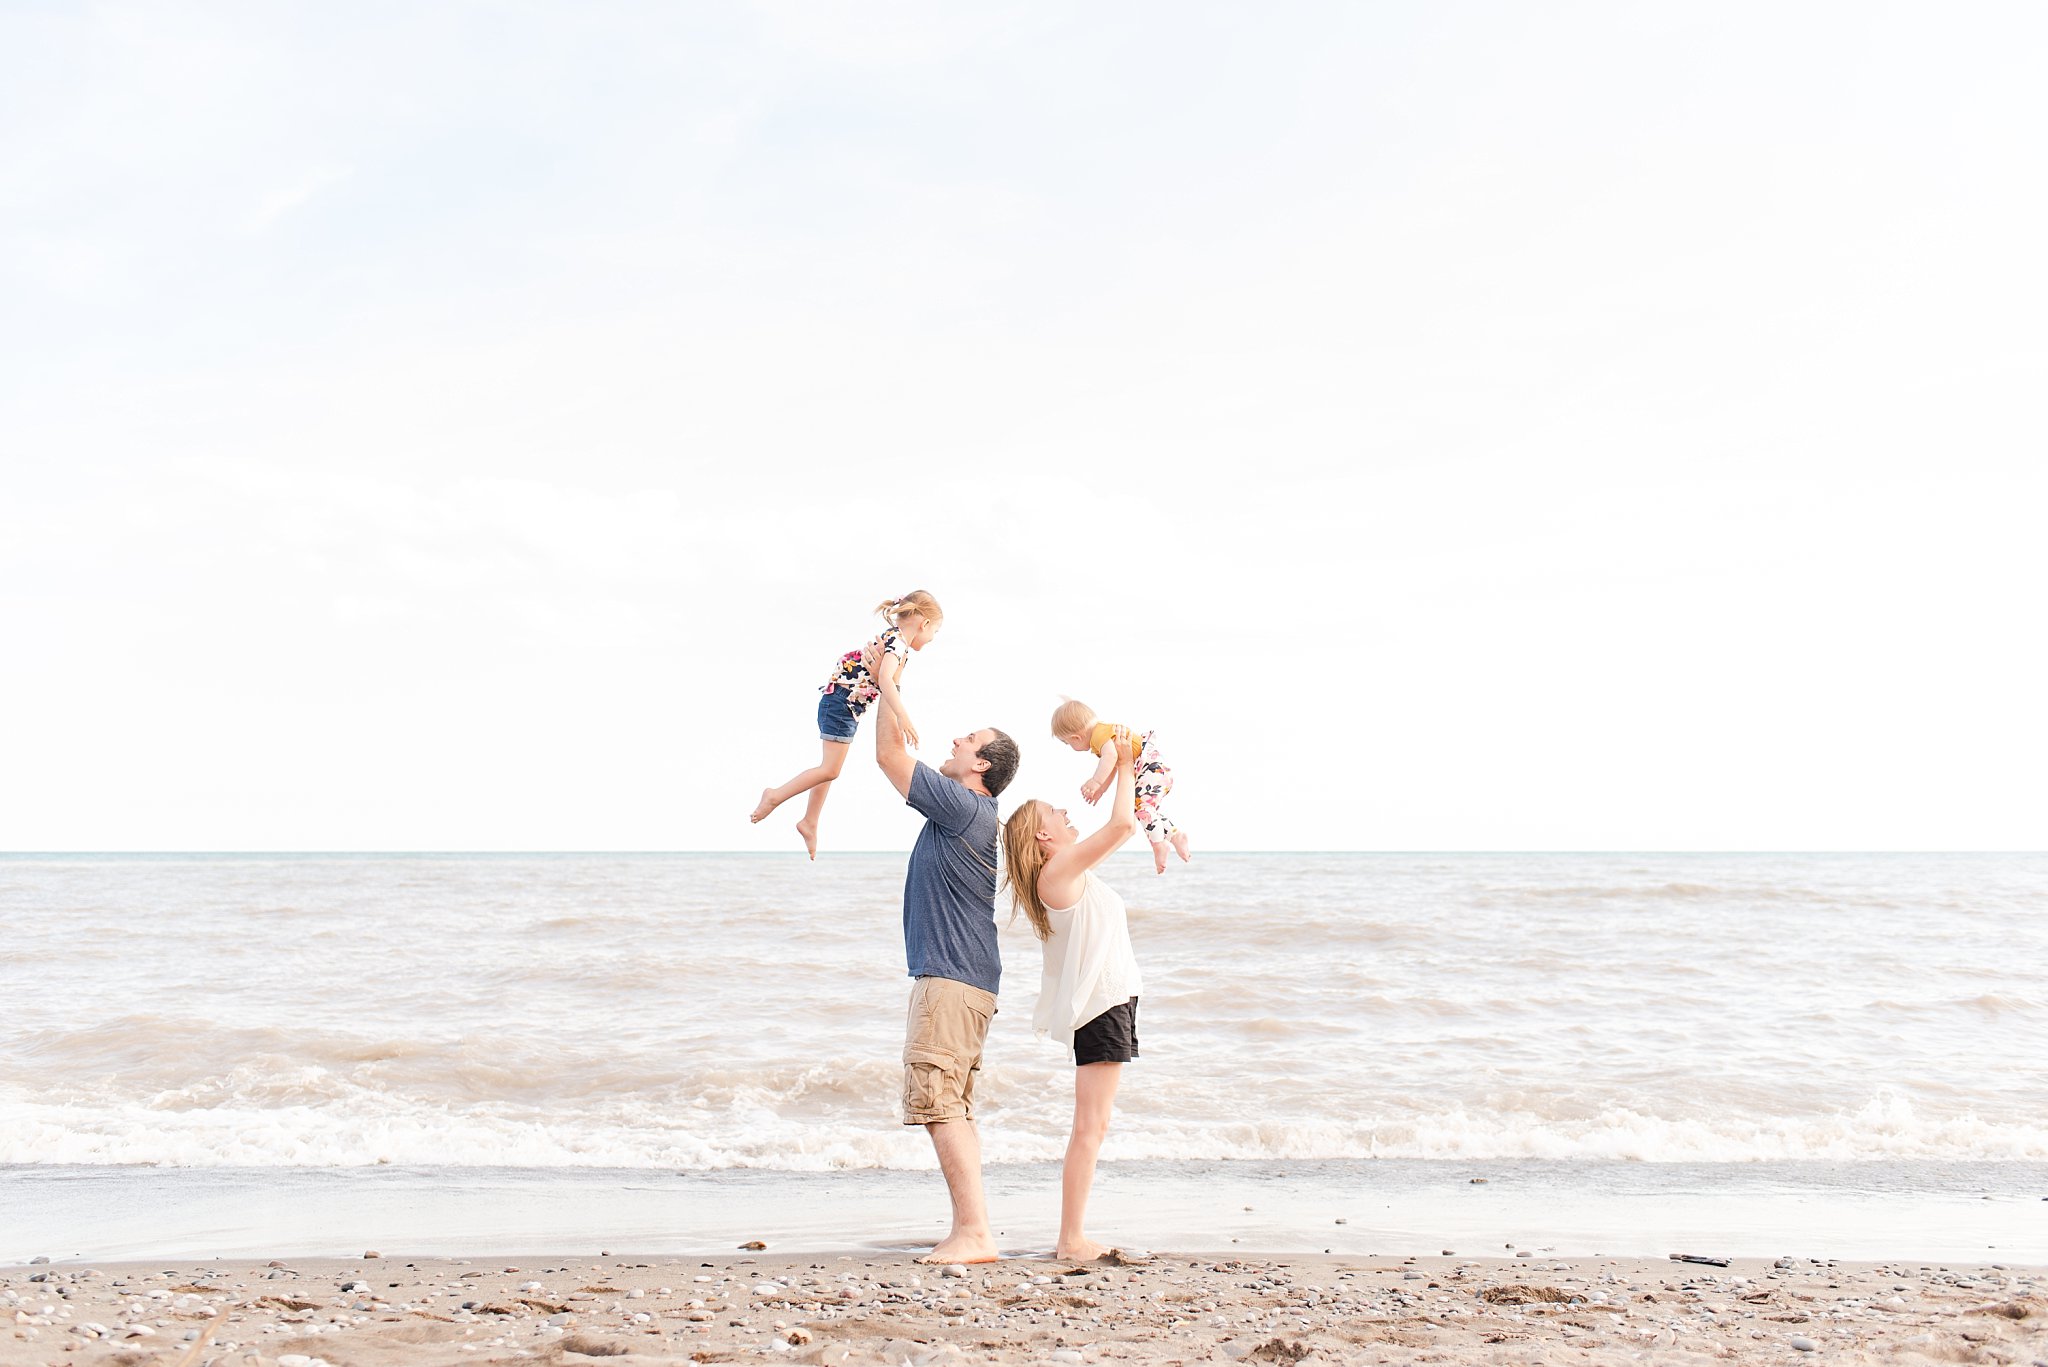 family photos in port stanley; mom and dad lift their daughters in the air on the beach with the water in the background